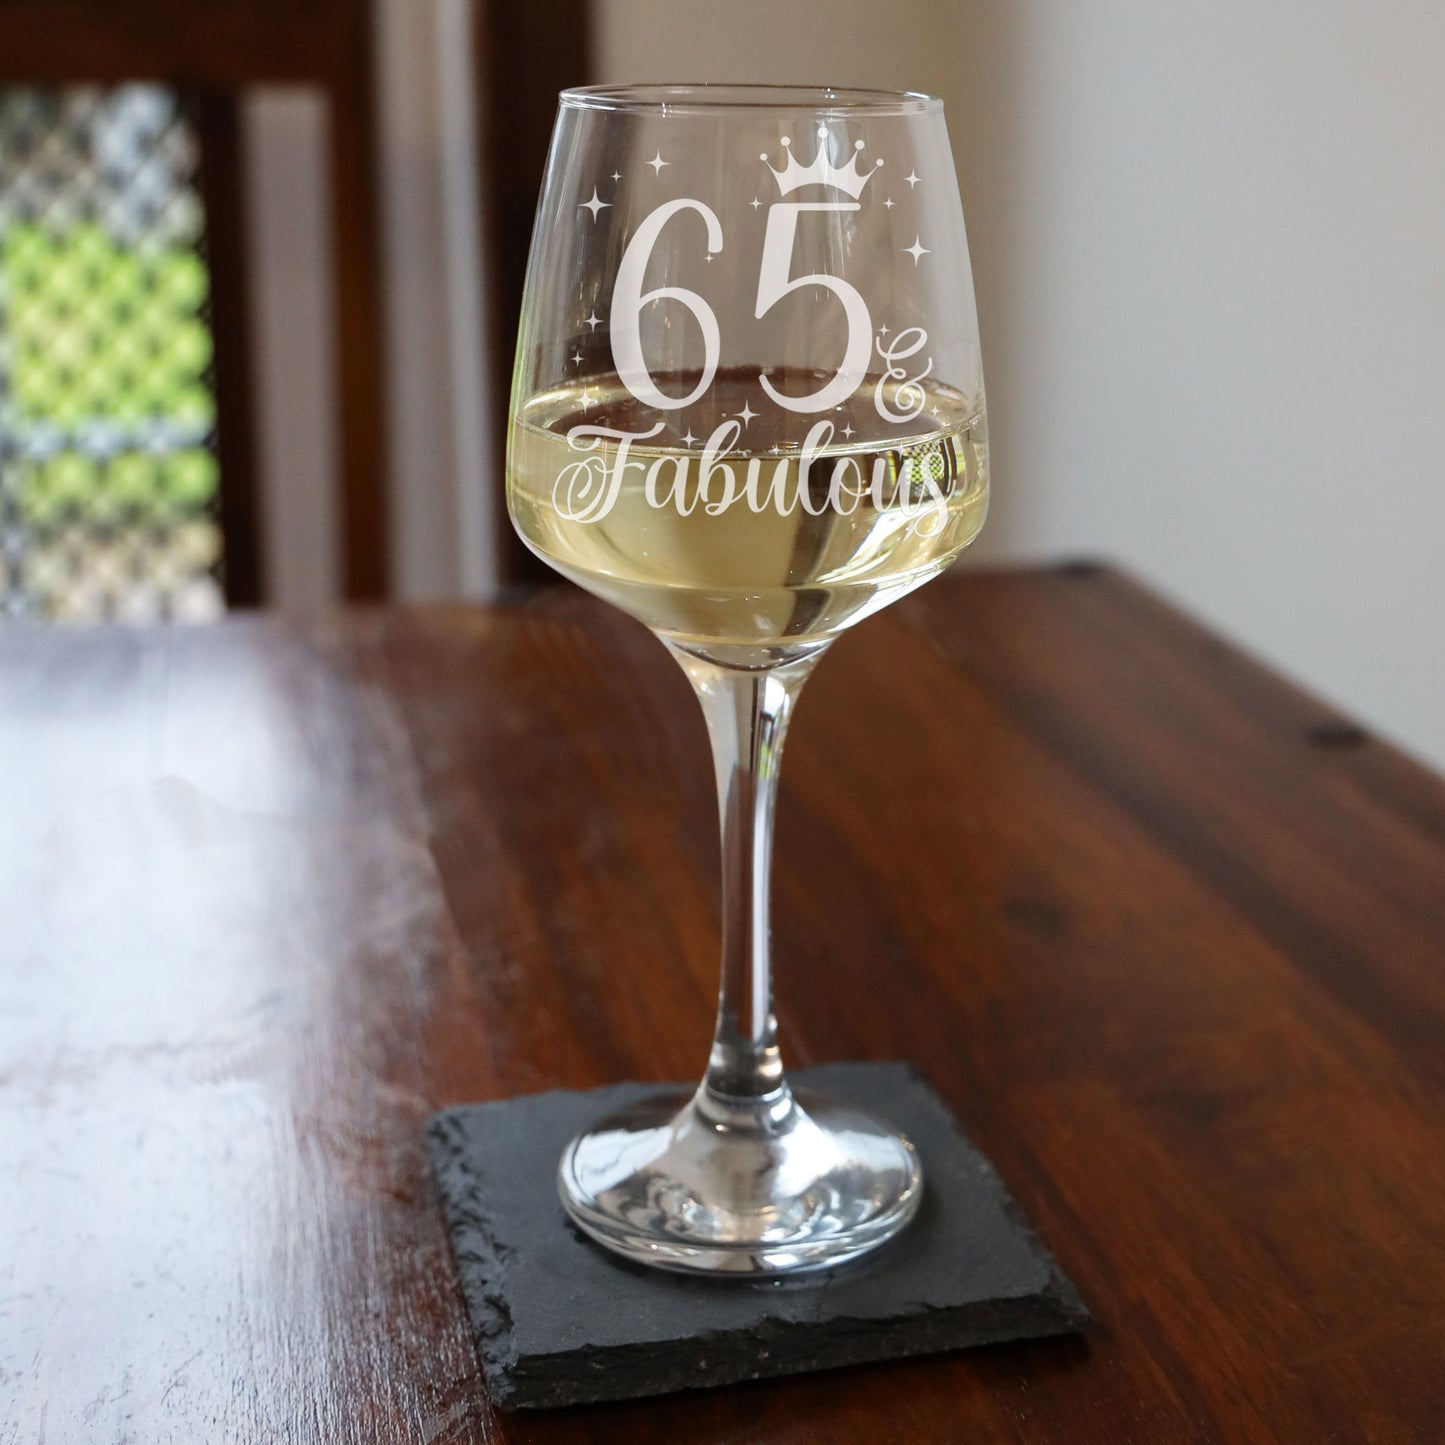 65 & Fabulous 65th Birthday Gift Engraved Wine Glass and/or Coaster Set  - Always Looking Good - Wine Glass Only  